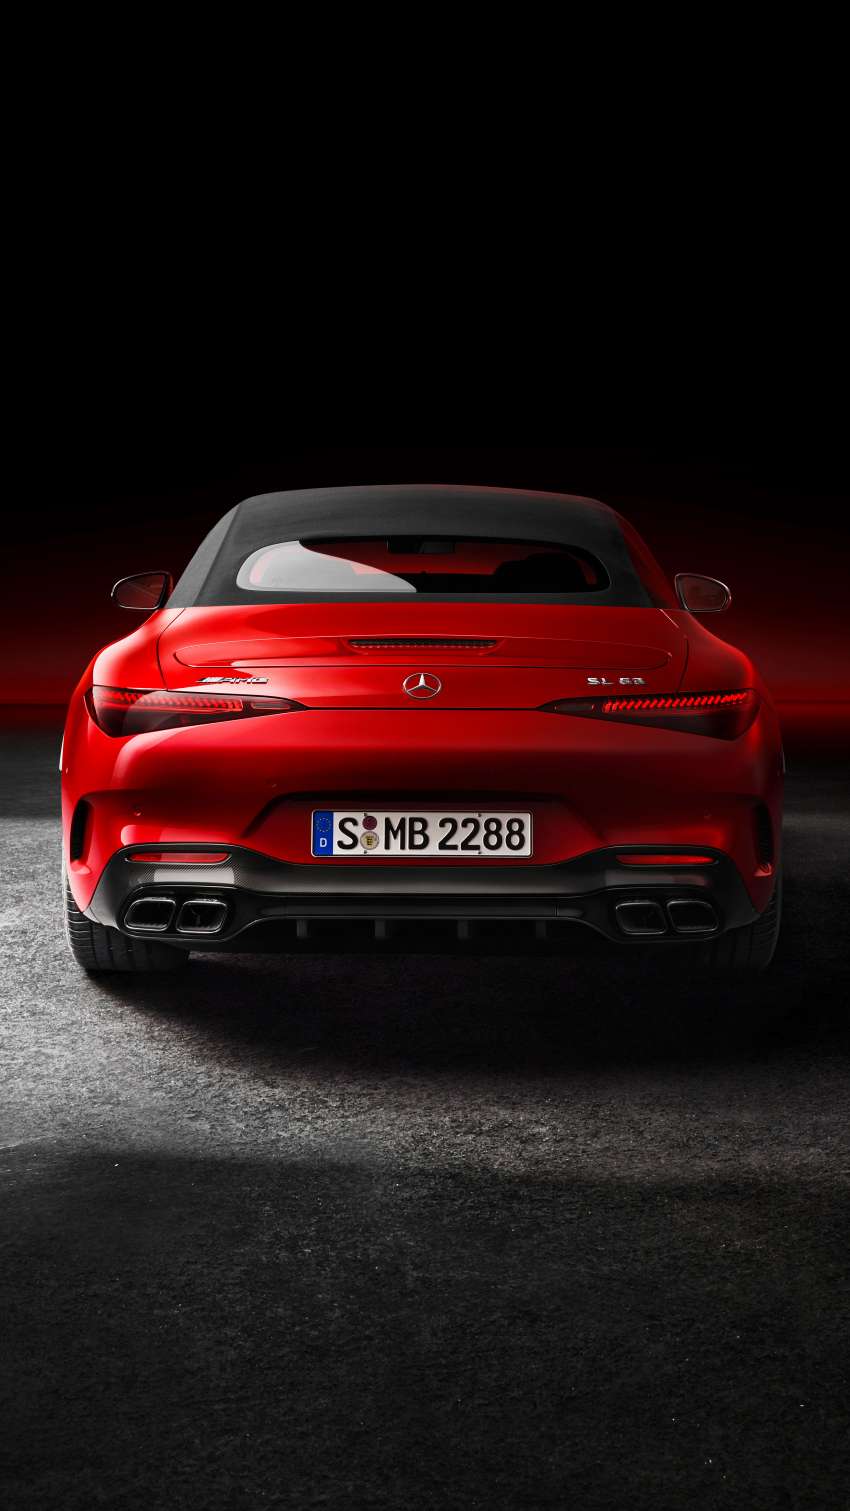 2022 Mercedes-AMG SL revealed – R232 developed by Affalterbach, 476 PS SL55, 585 PS SL63, PHEV later Image #1369263